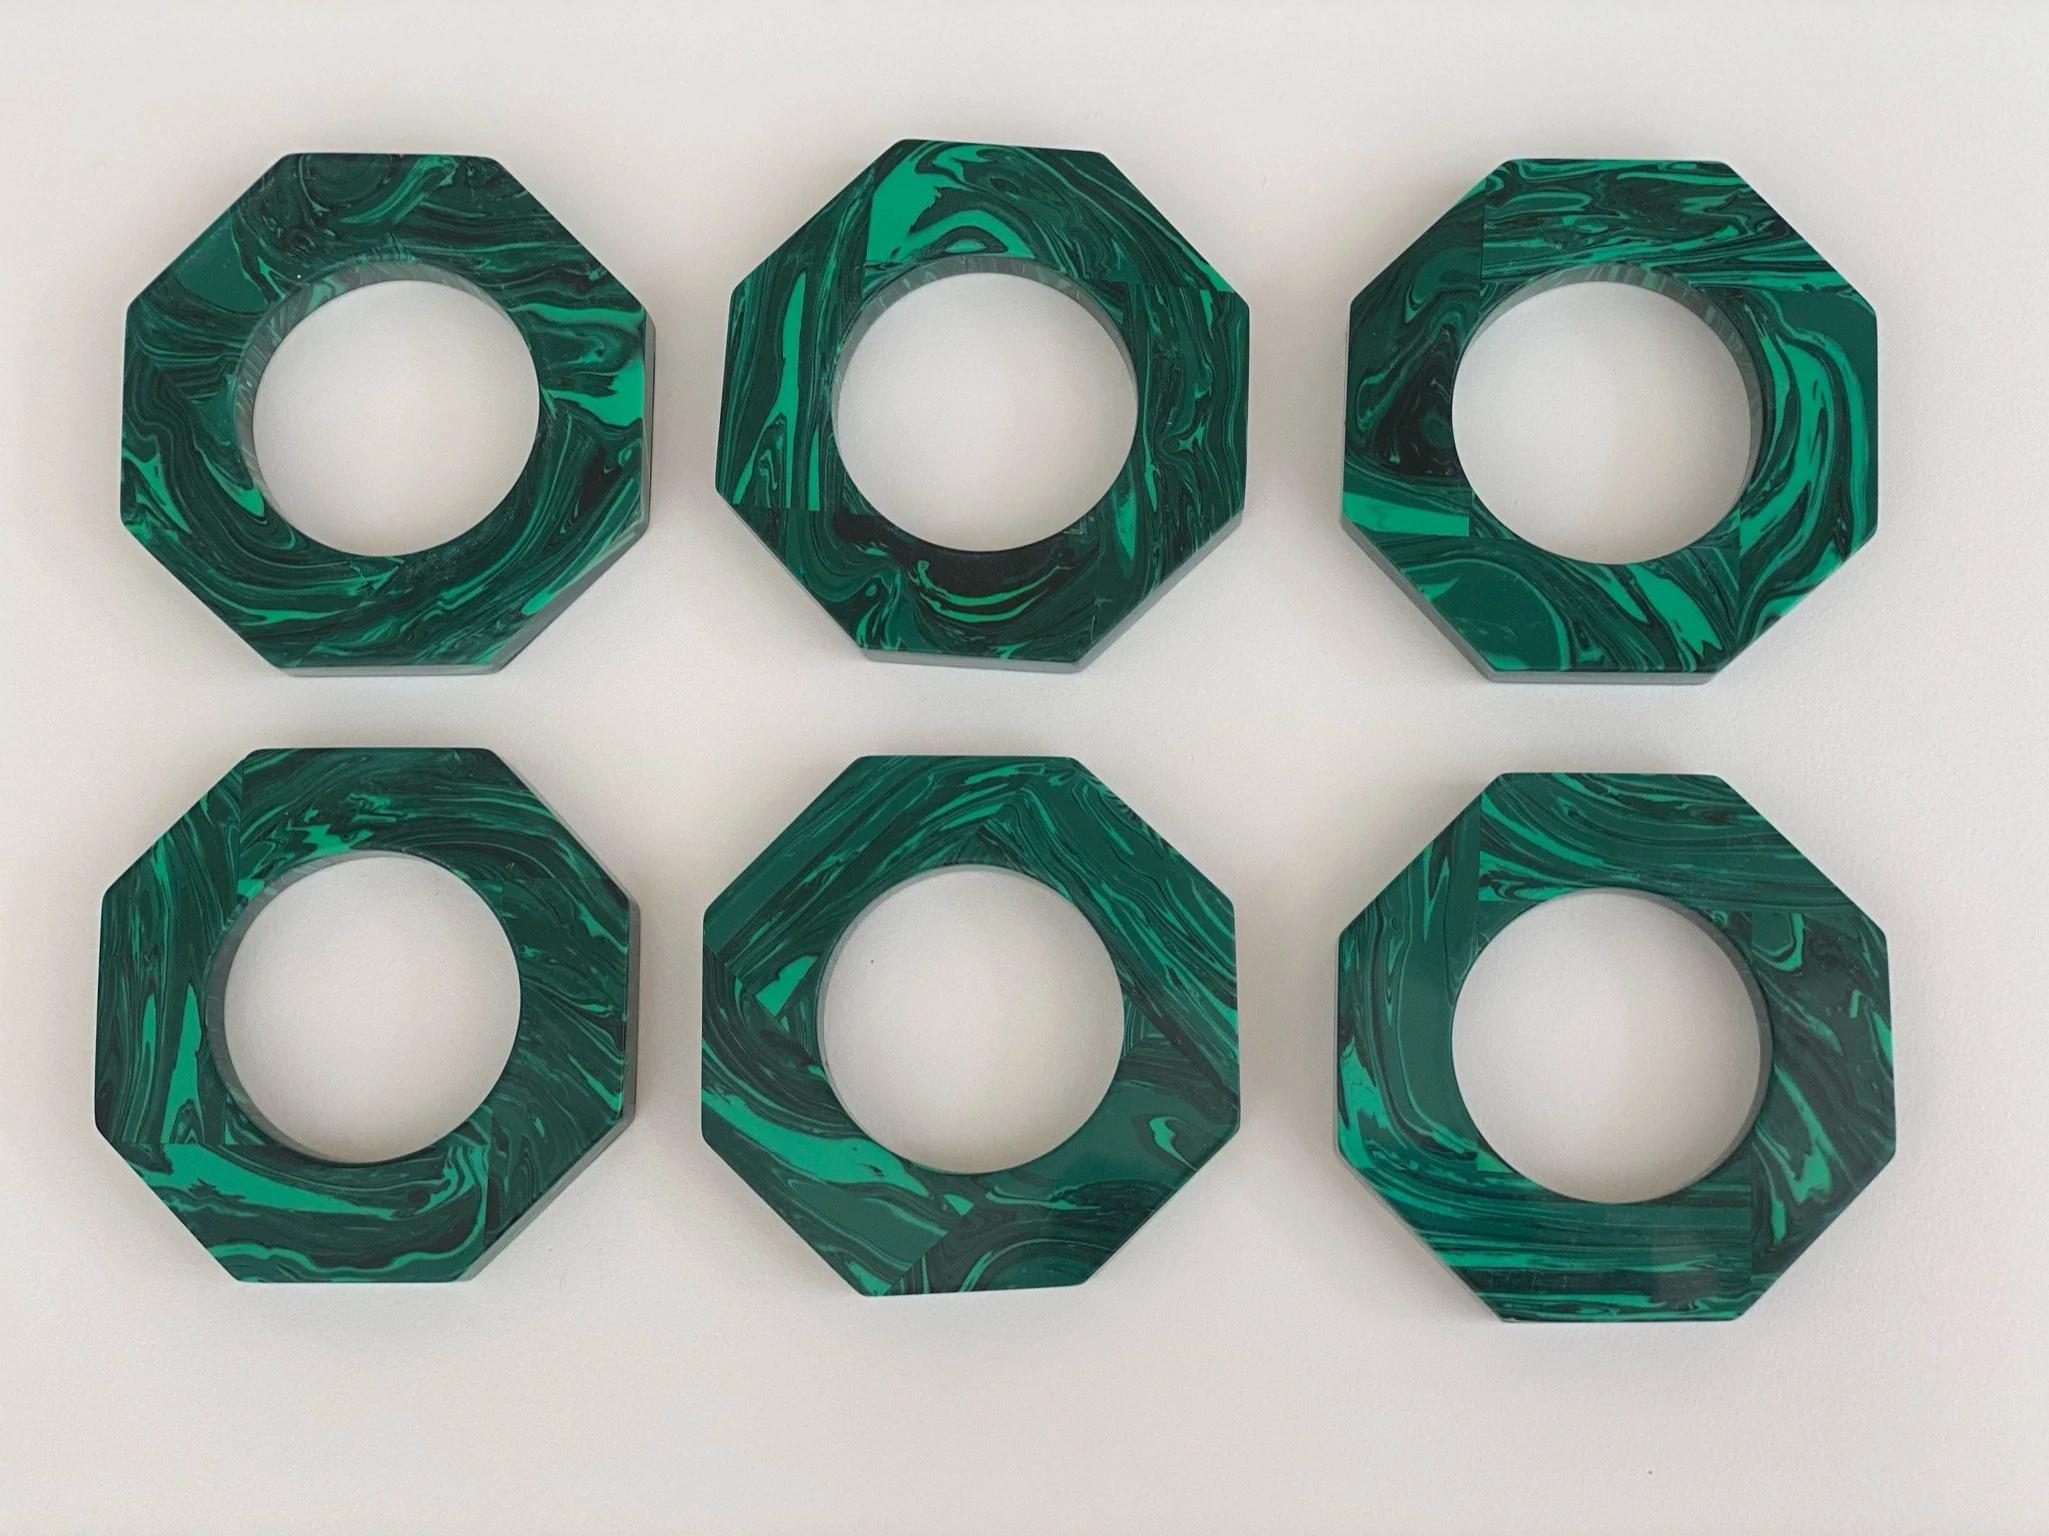 Set of 6 Octagonal Malachite Napkin Rings by Marcela Cure
Dimensions: W 7 x D 7 x H 1 cm
Materials: Malachite

Our luxurious Malachite Napkin Rings are completely made with natural malachite. They are the perfect finishing touch for a beautiful